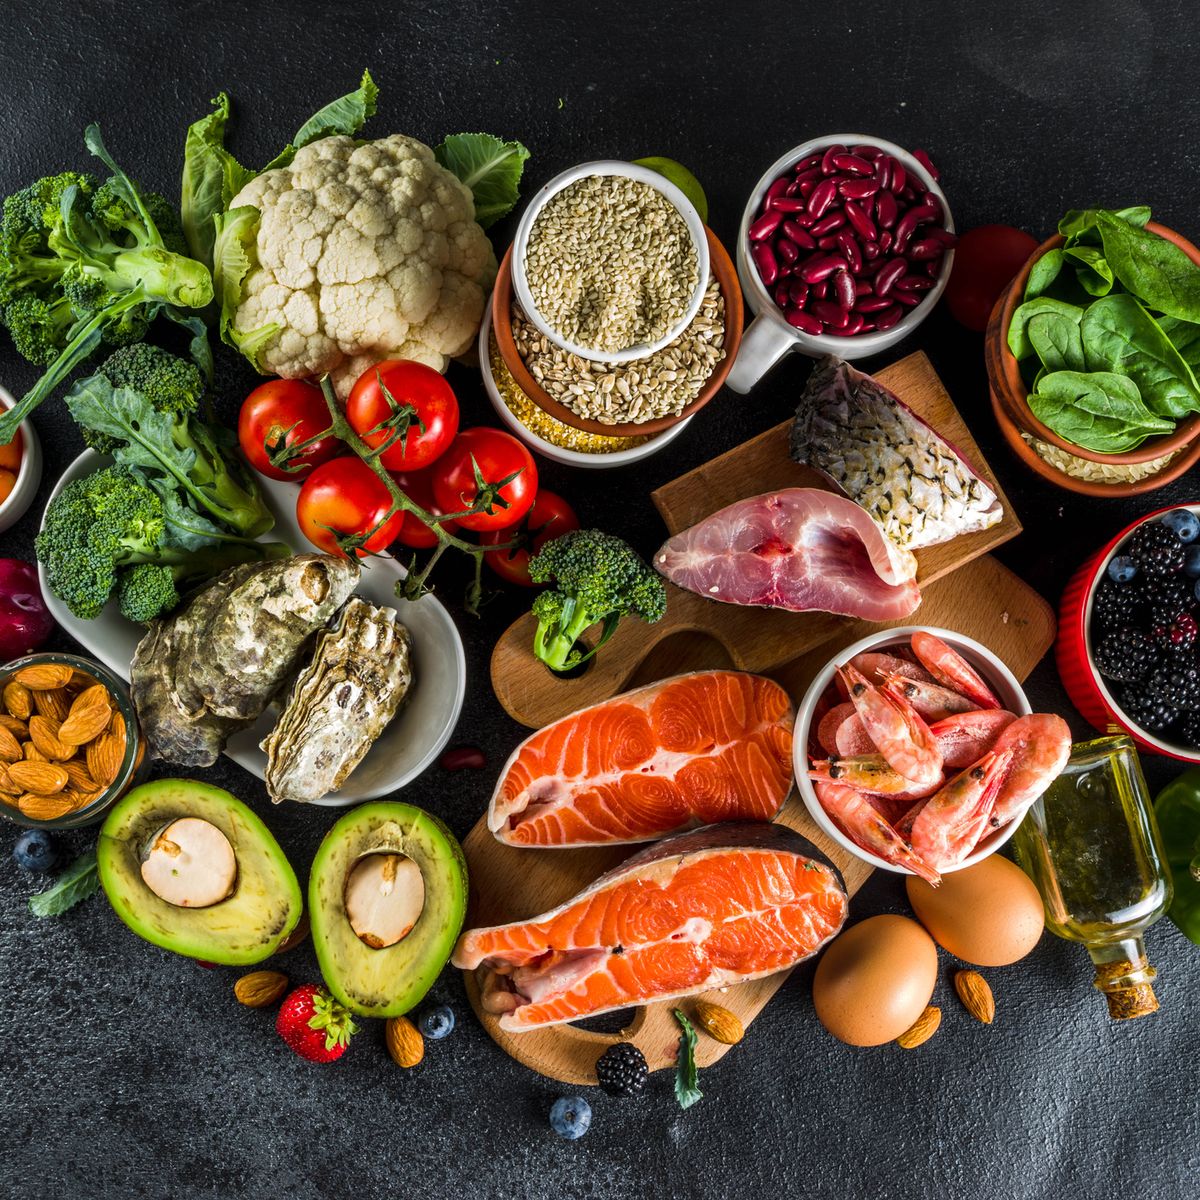 What The Ketotarian Diet? Pros Cons To Keto